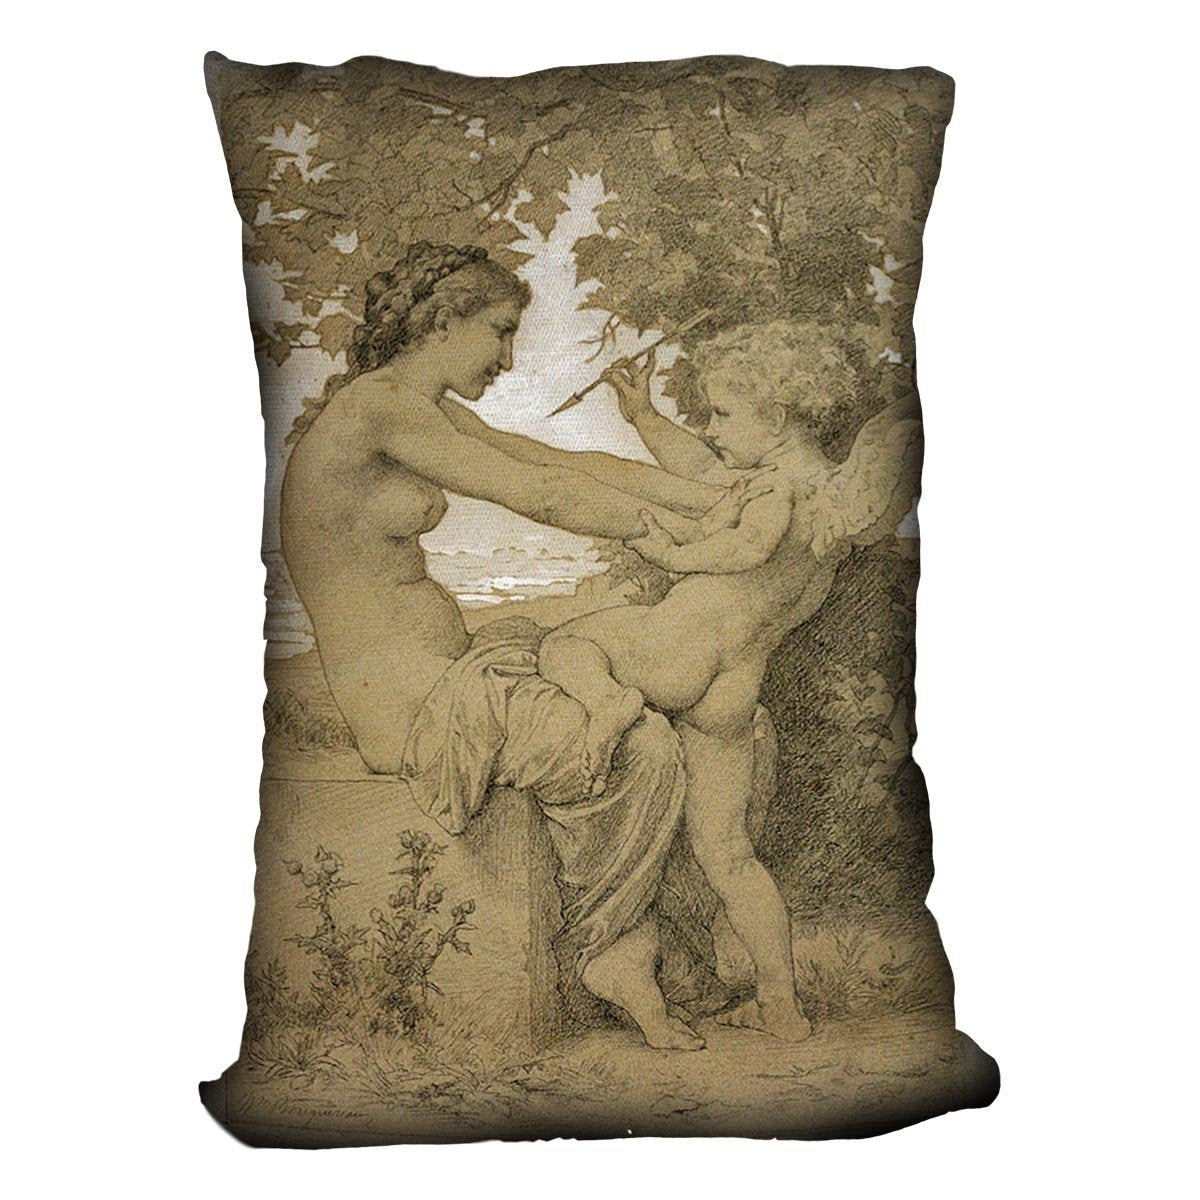 Loves Resistance By Bouguereau Throw Pillow